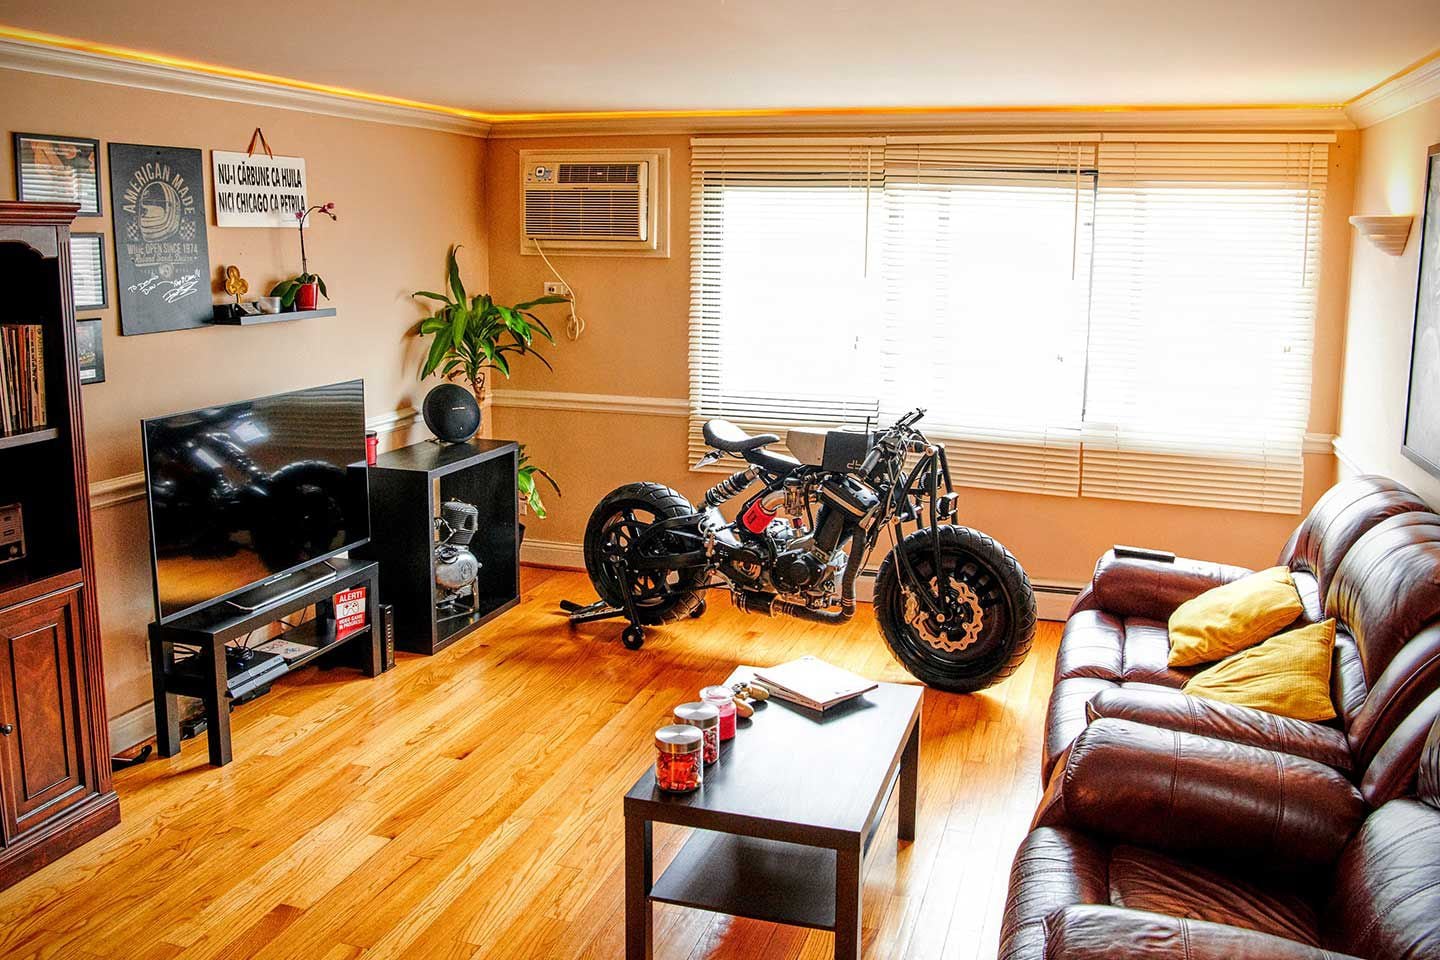 Liviu Alexandru Maslin’s award-winning custom (and very trick) Buell Blast was partially assembled in his (and his wife’s) living room.